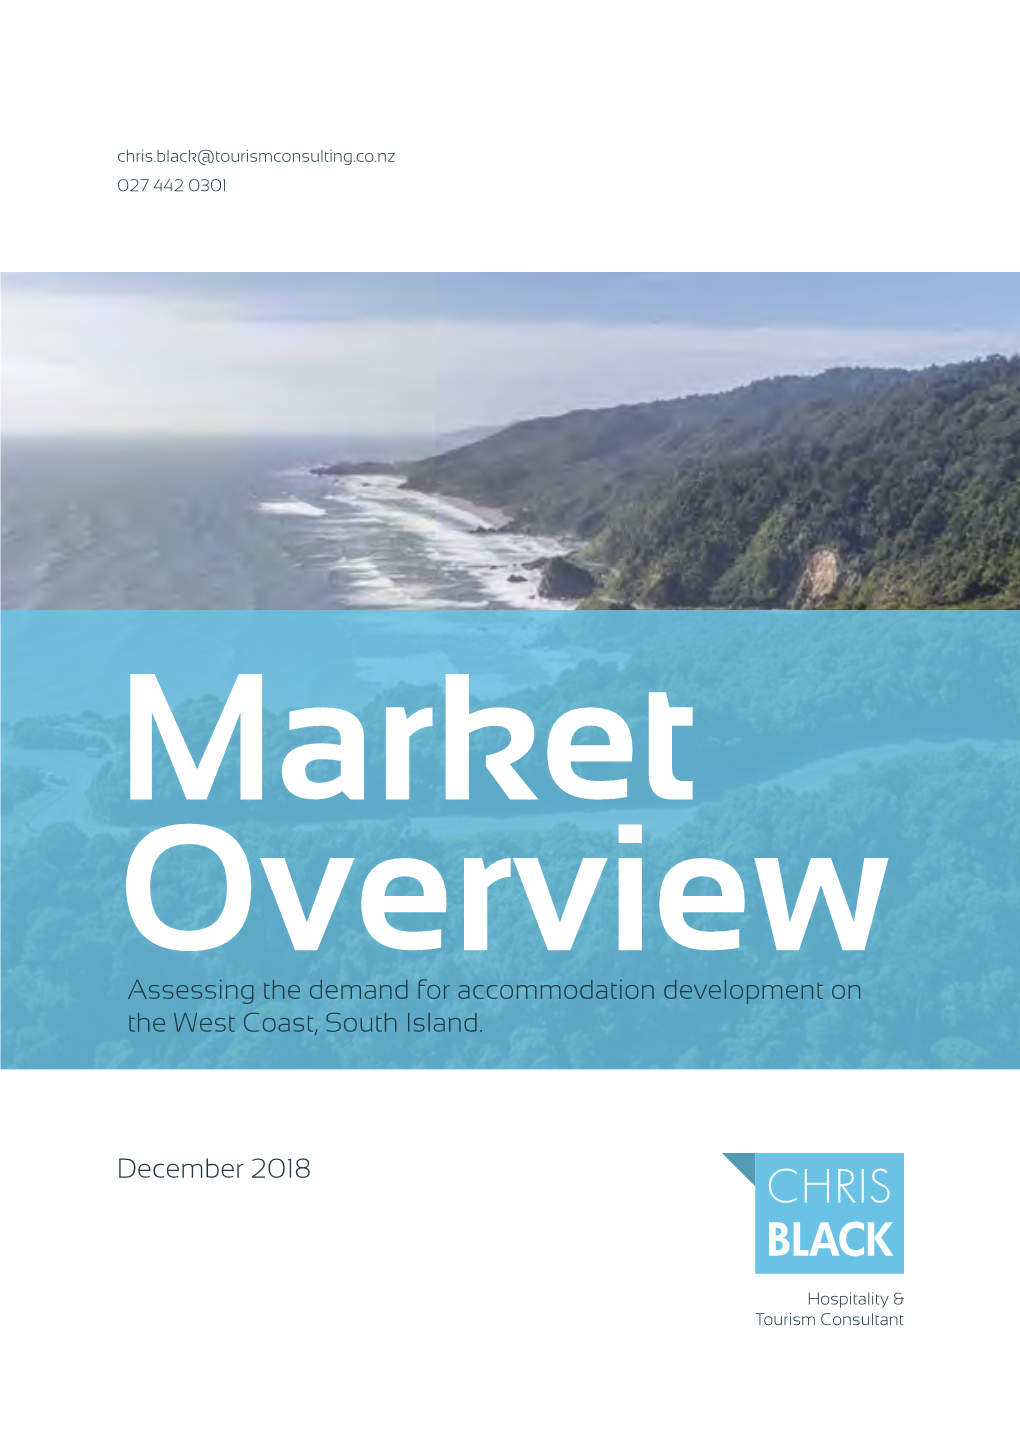 Assessing the Demand for Accommodation Development on the West Coast, South Island